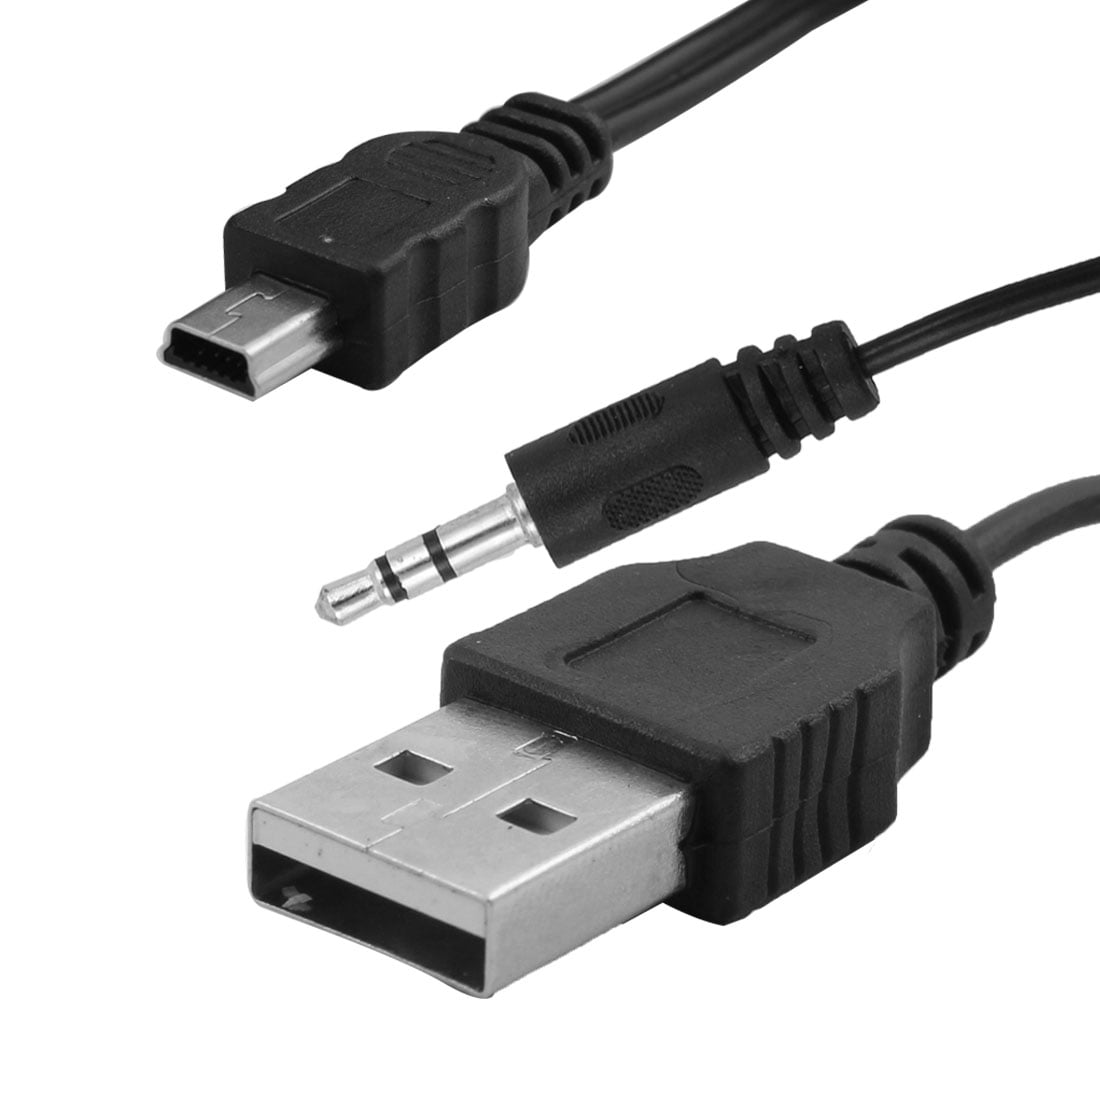 Audio 3.5mm Jack USB 2.0 Type A Male to USB Type B Male Data Cable 3 Pcs 